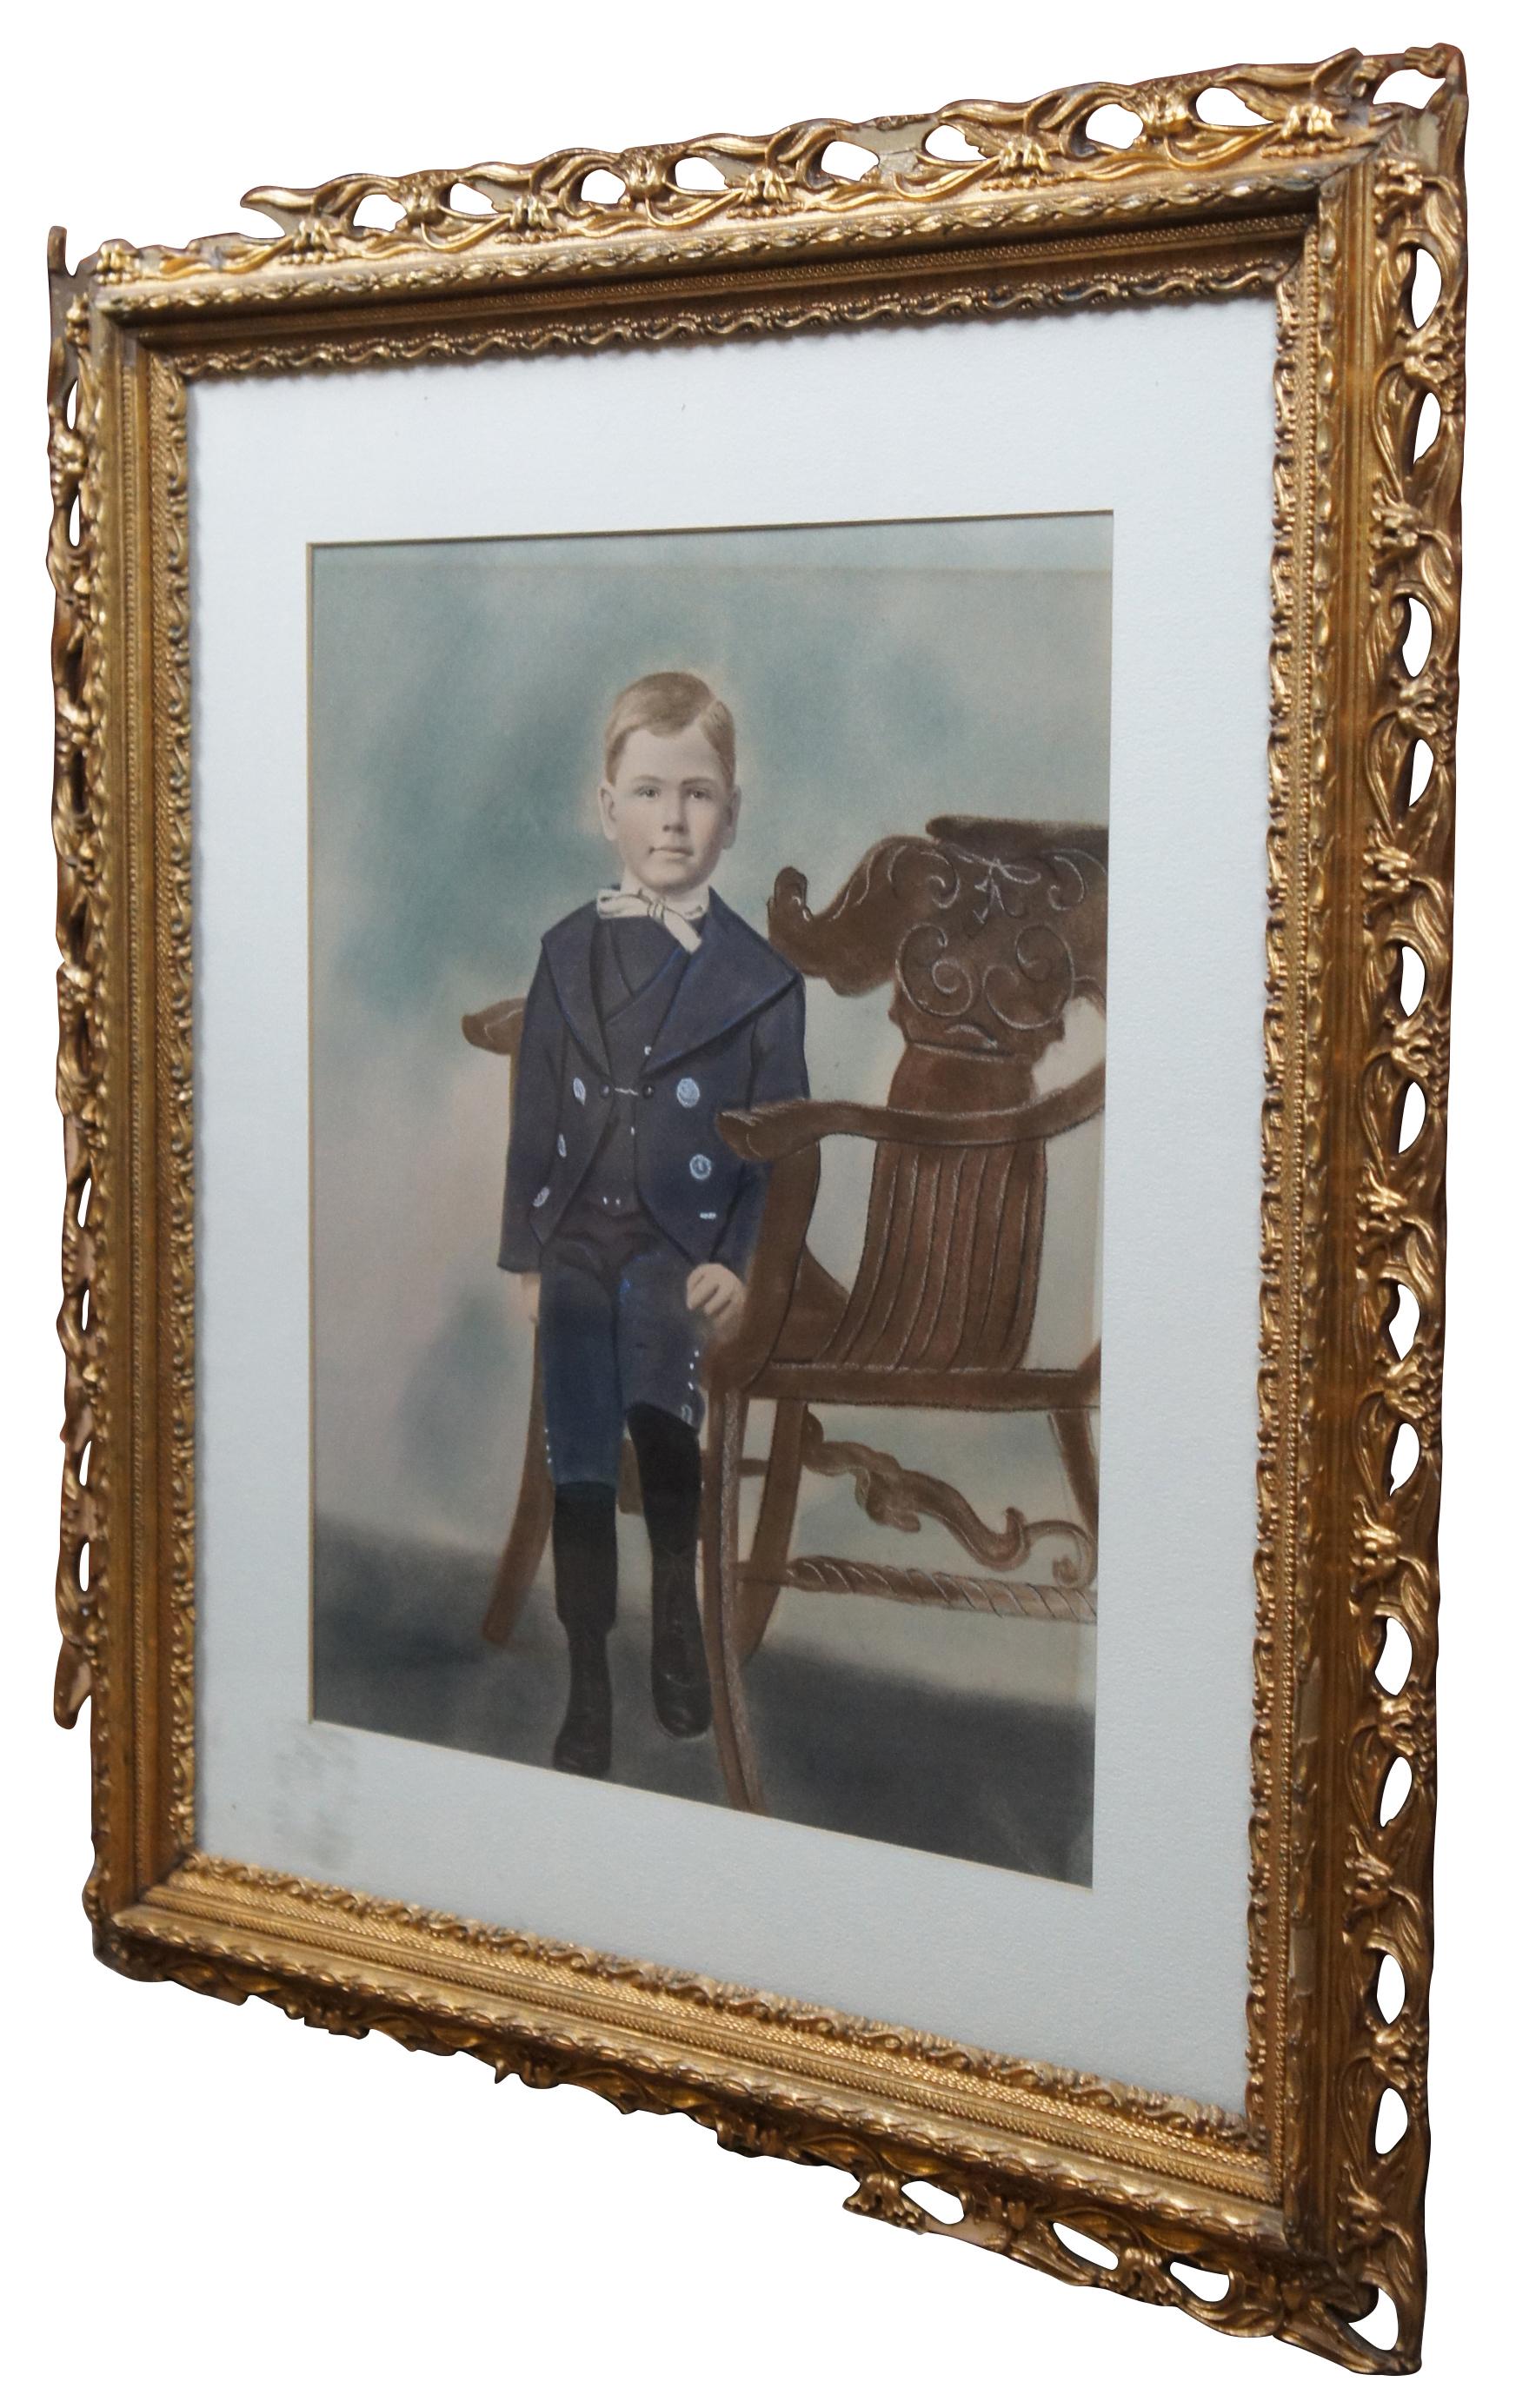 Antique pastel portrait of a young boy in early 20th century clothing sitting upon a Victorian Northwind chair. A sticker previously affixed to the front glass identified the boy as Marcel Goffena, possibly the same Marcel Goffena (1913-1999) who